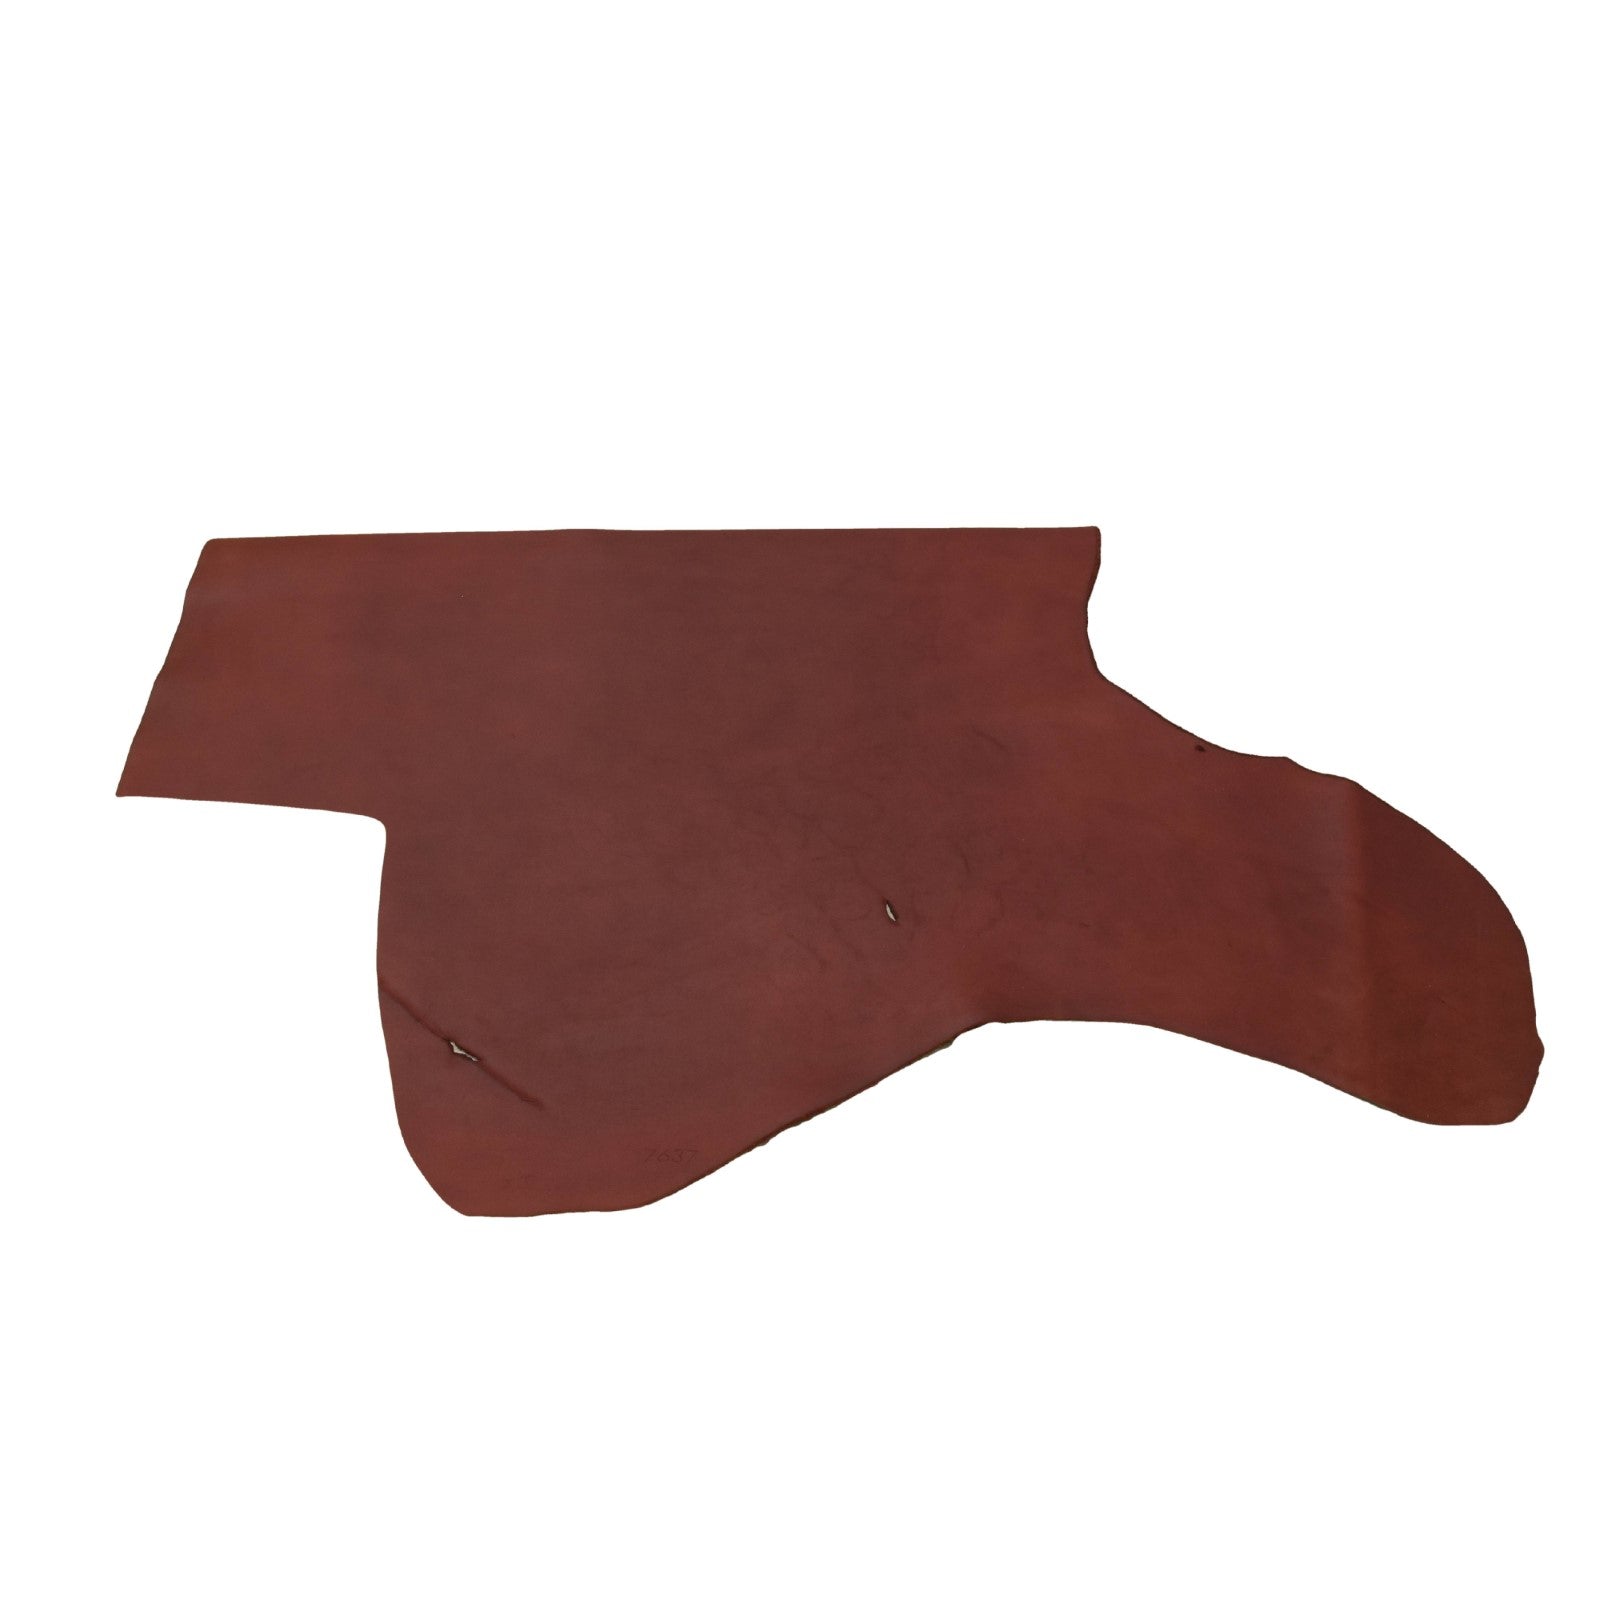 Light Burgundy Wildfire, Oil Tanned Sides, Summits Edge, 18-29 Sq Ft, Bottom Piece / 6.5 - 7.5 Sq Ft | The Leather Guy